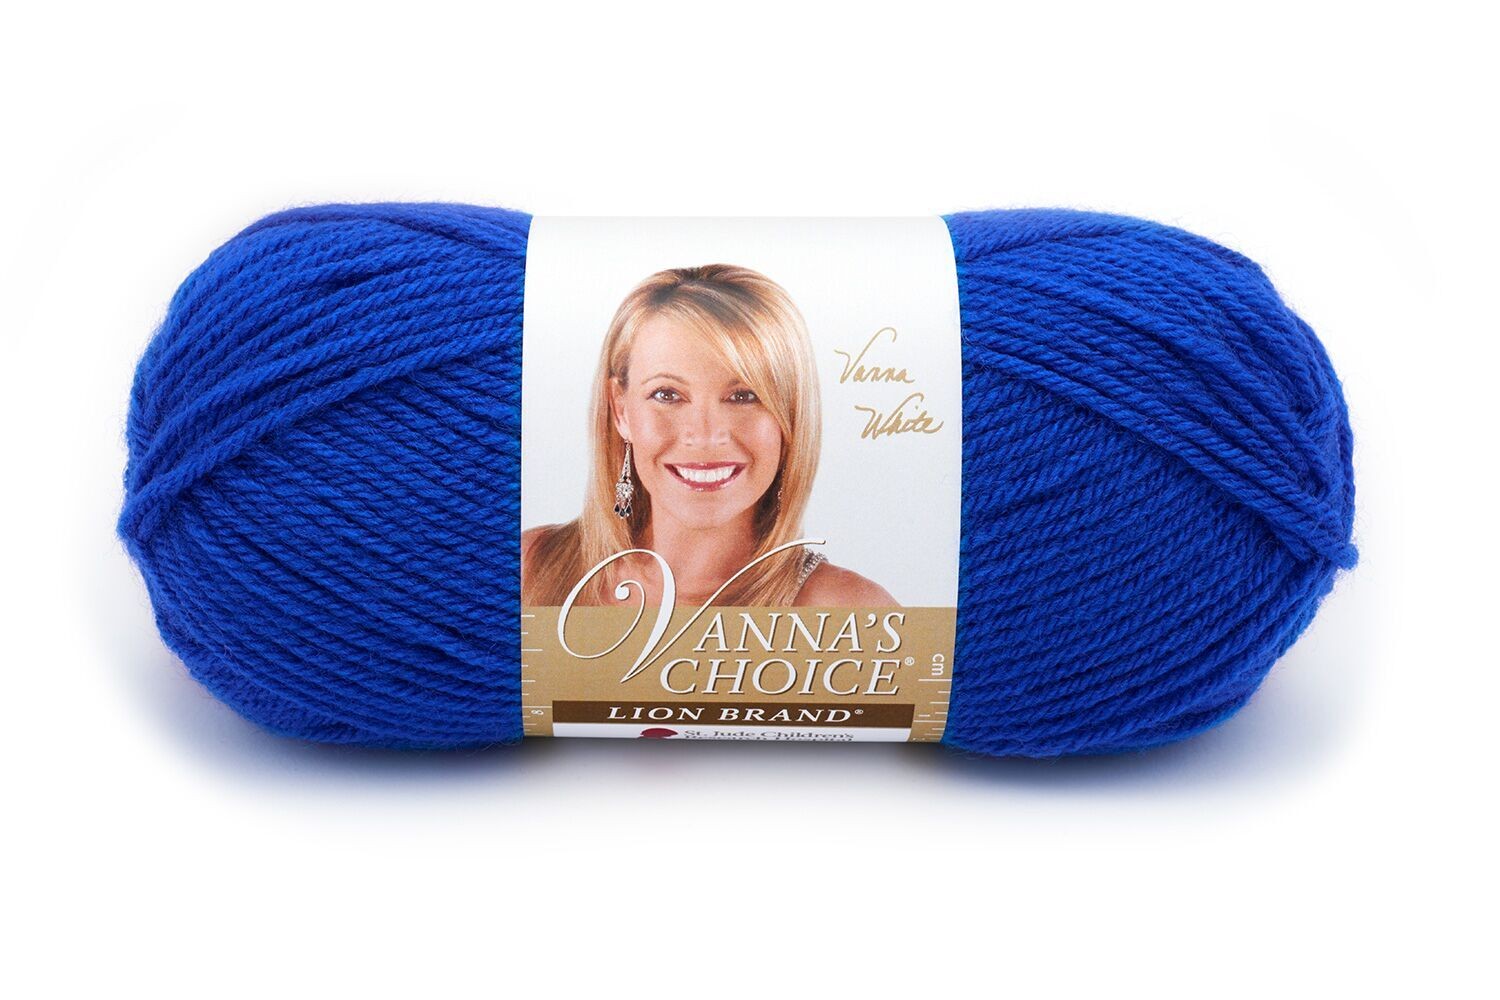 Vanna's Choice in Electric Blue